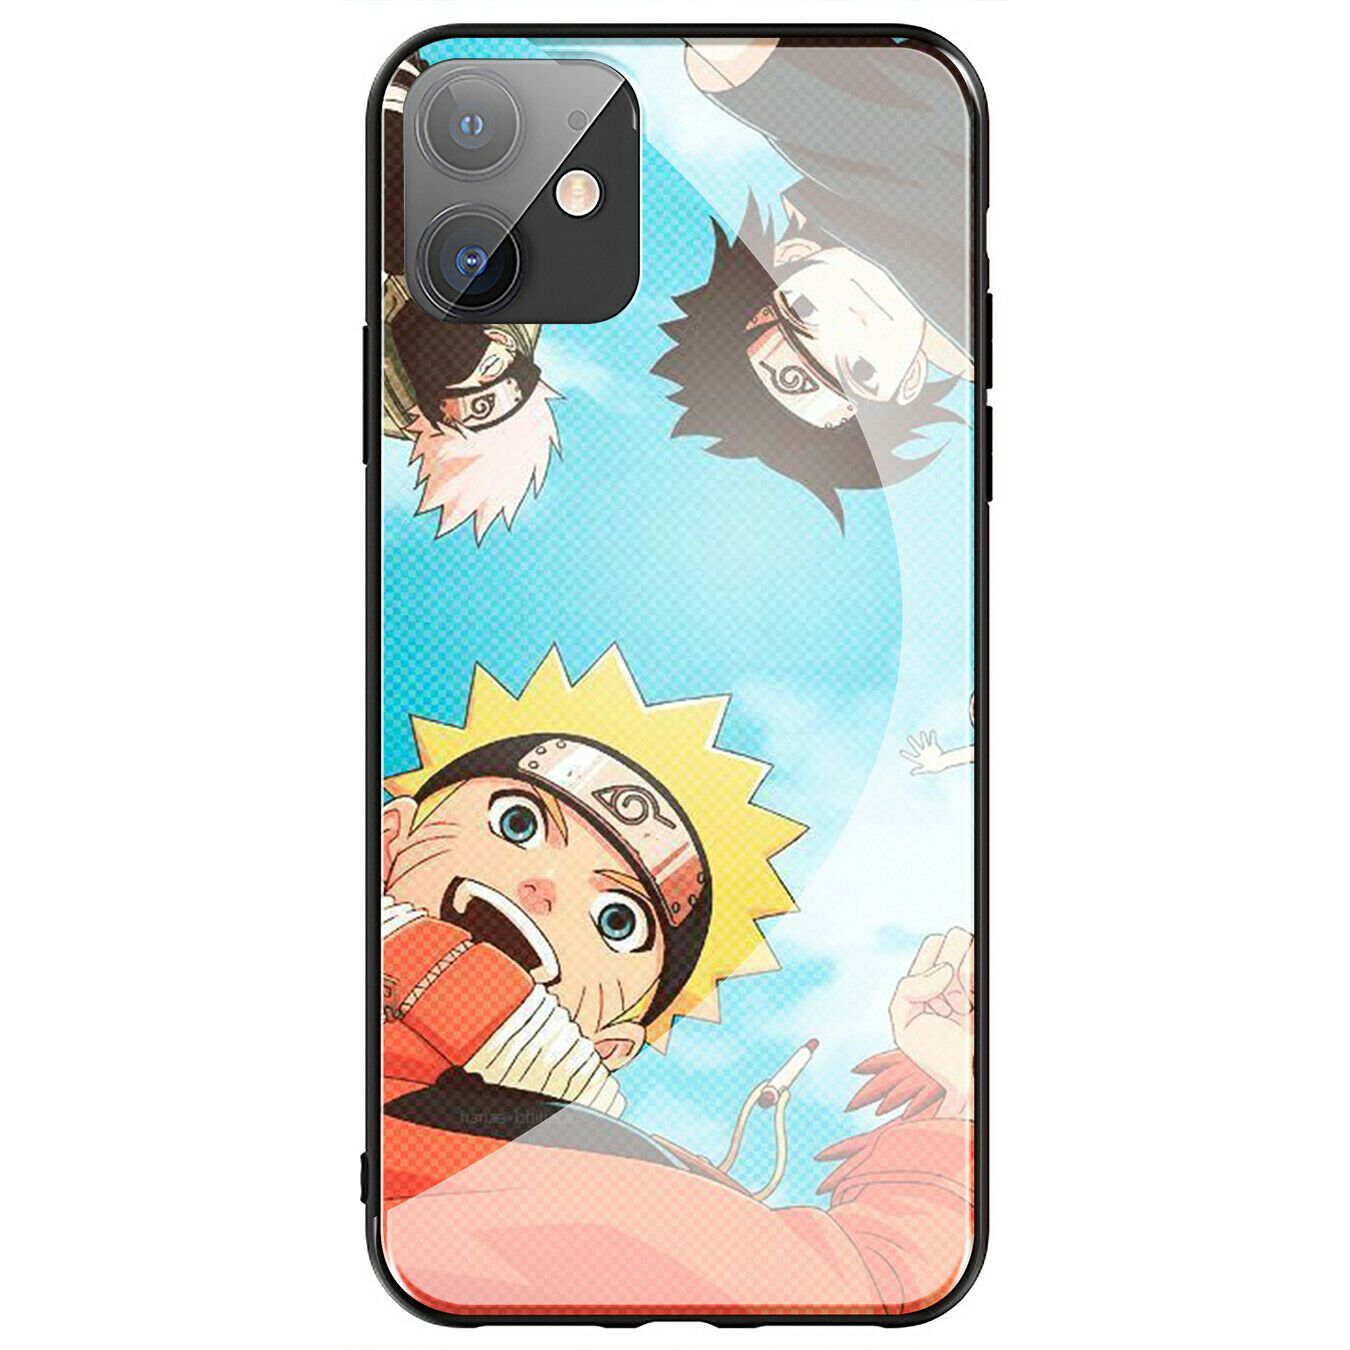 Sasuke NARUTO Akatsuki Glass Case for iPhone 11 Pro XR X XS Max 8 7 6 6s Plus + iPhone Cases AtlasCase 7 for iPhone 6/6S 